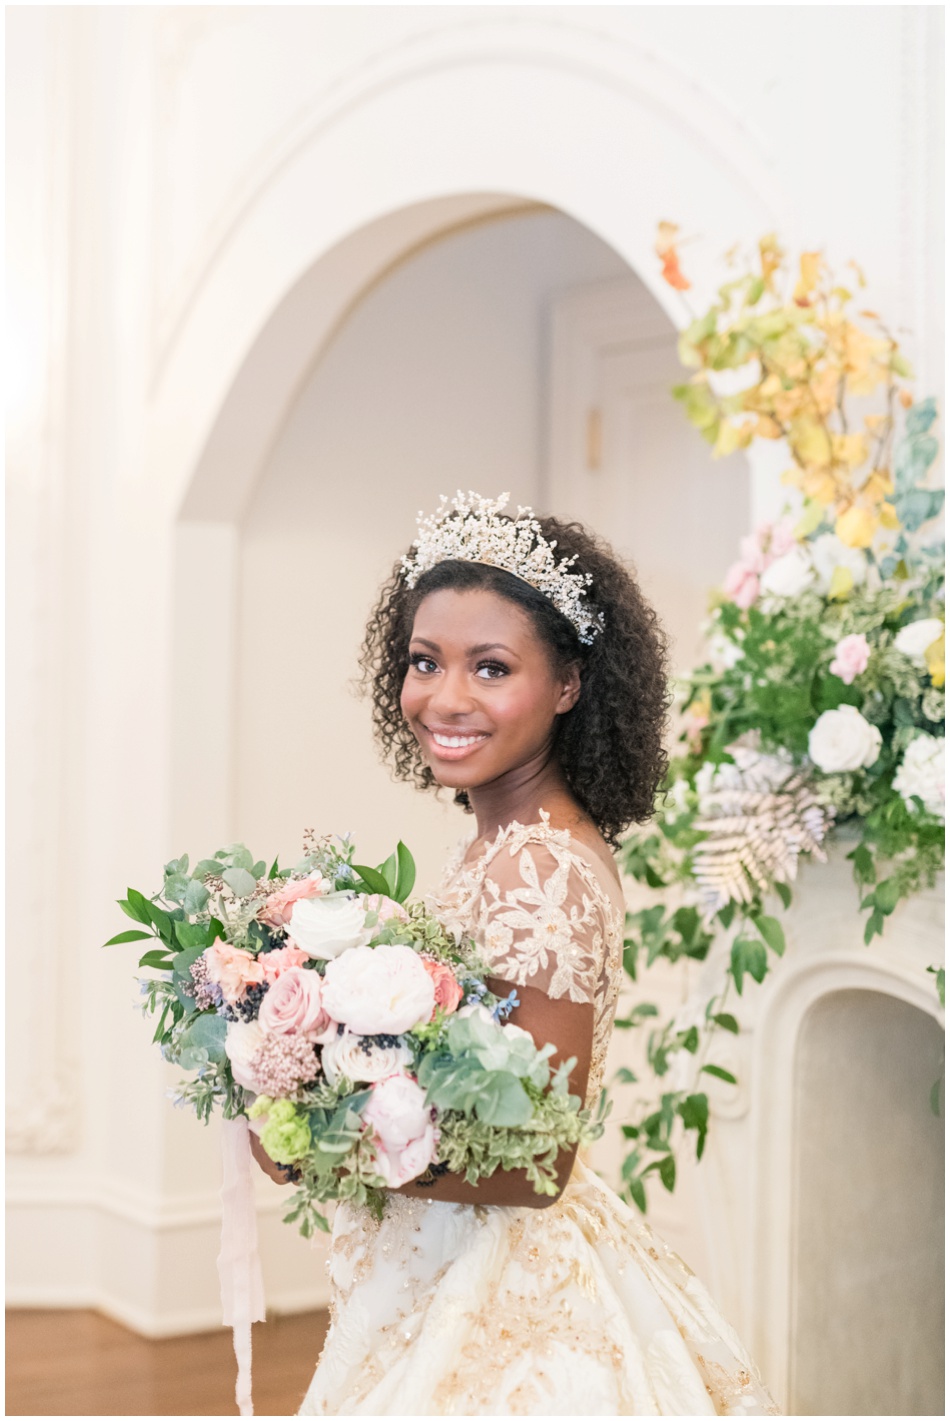 Best wedding photographer for Dallas Brides getting married at The Olana